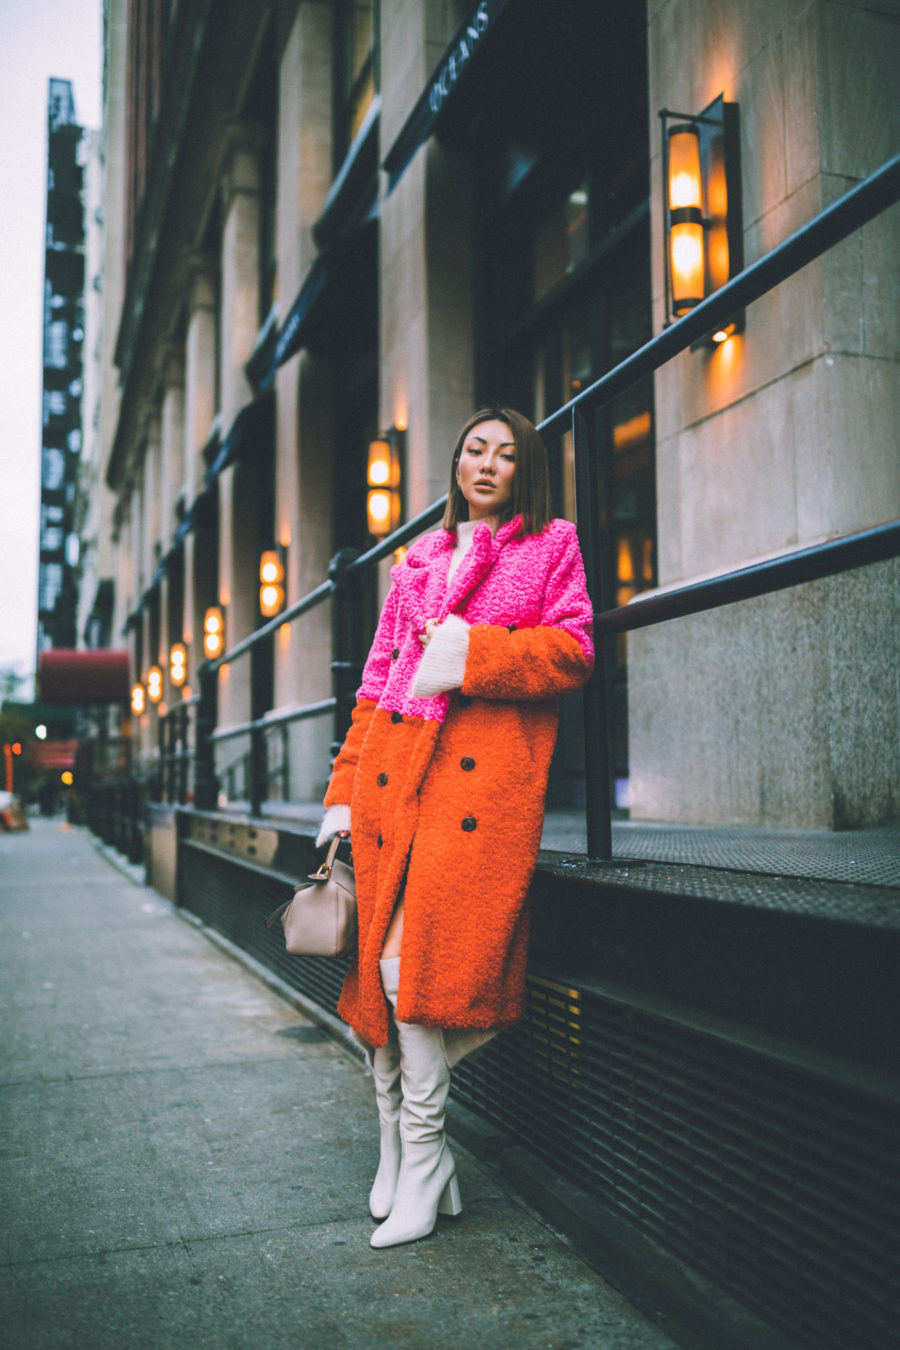 fashion blogger jessica wang shares holiday gift guide for the whole family wearing colorblock coat loewe puzzle bag and white boots // Notjessfashion.com